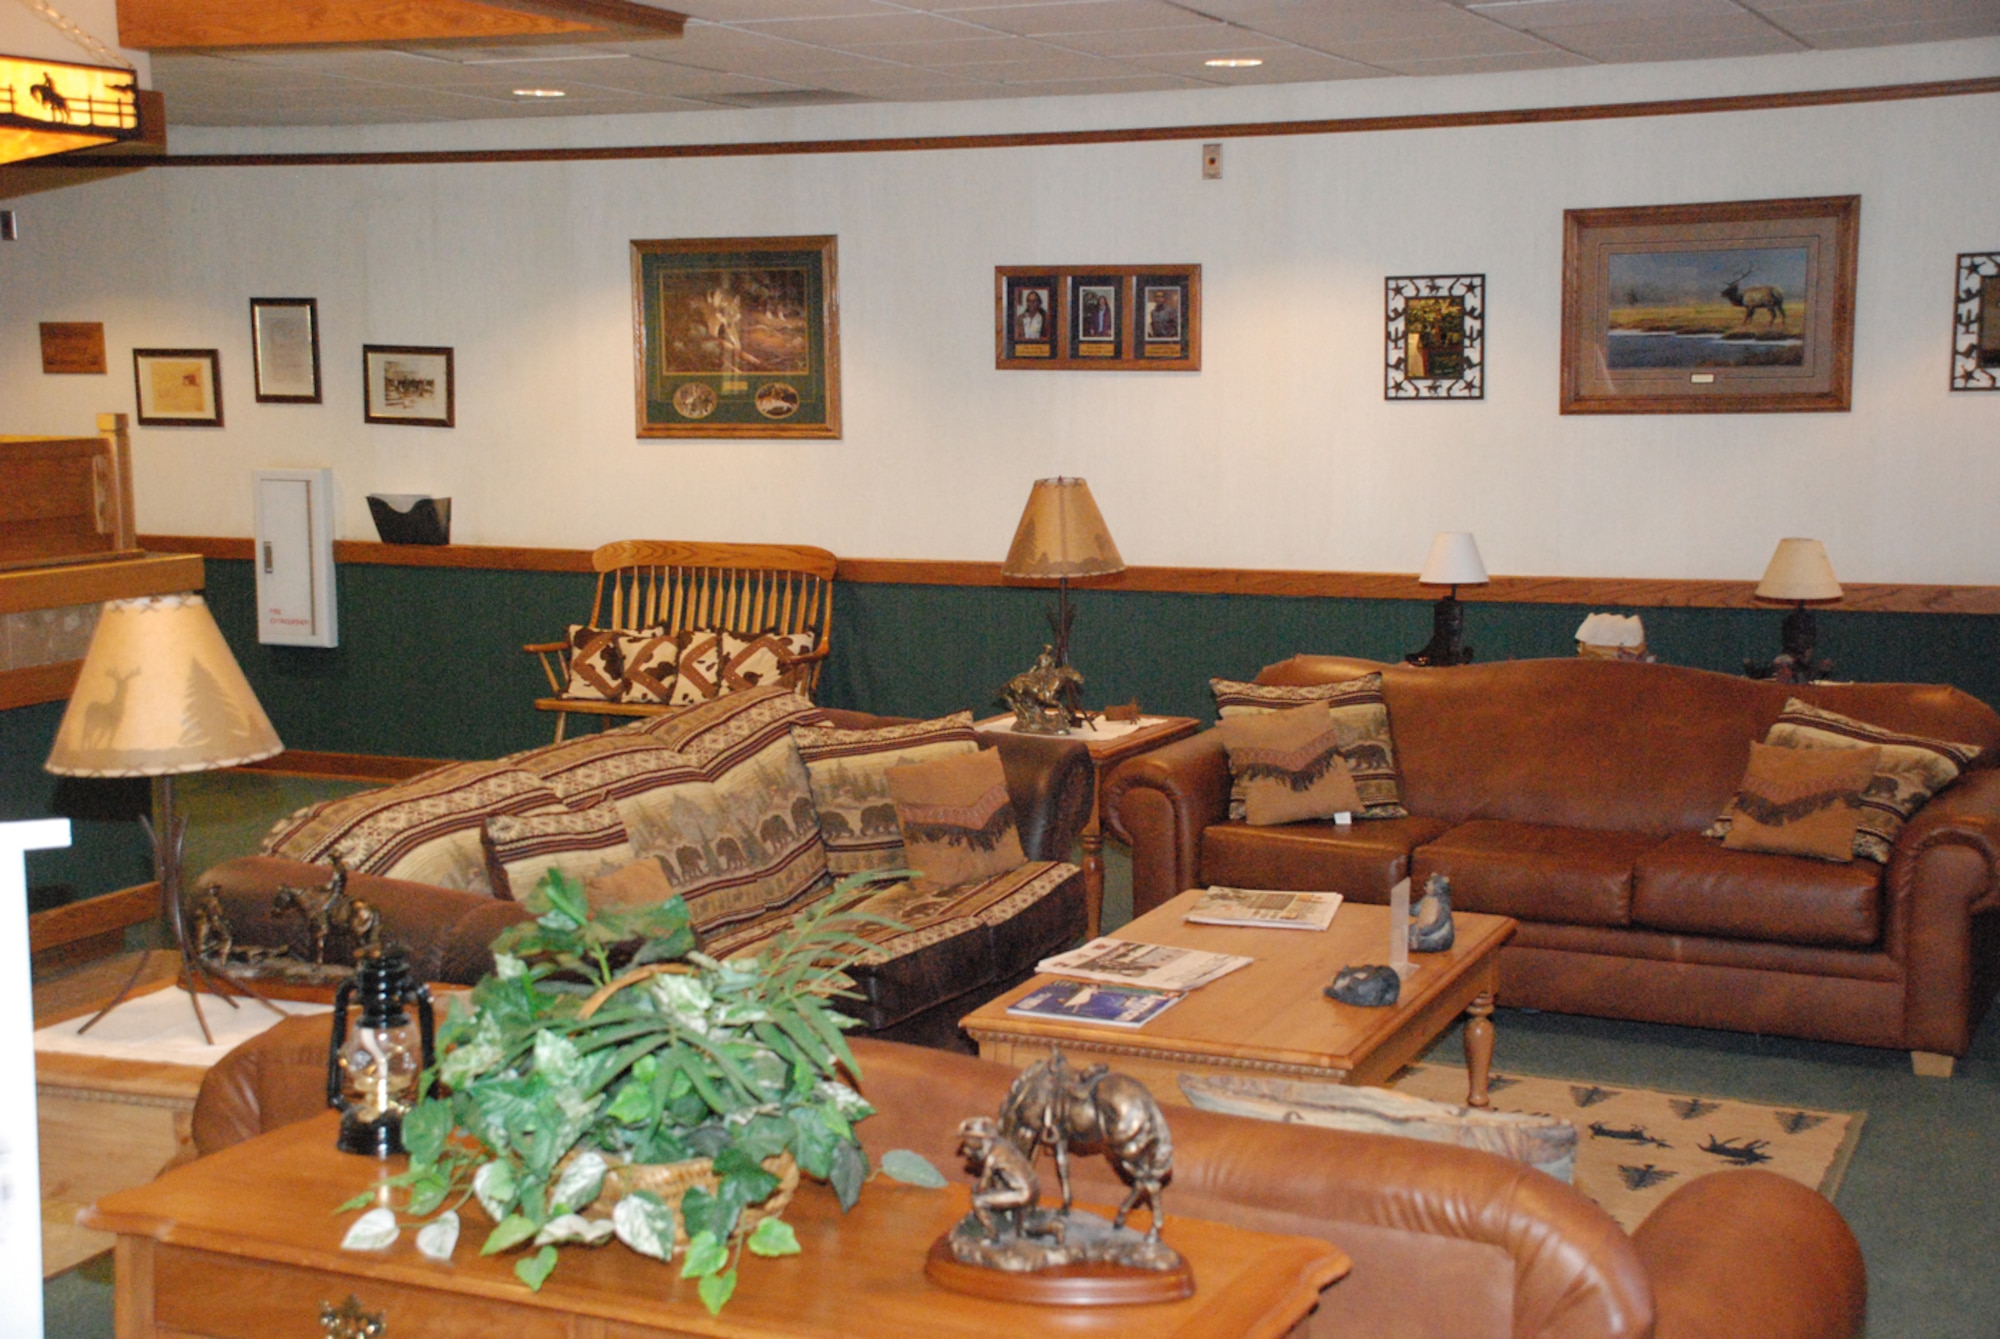 The Crow Creek Inn’s reception area is decorated in a western motif to allow guests to experience a part of Warren’s history. Many of the temporary lodging suites and visitor’s rooms are decorated with a similar theme. The inn passed an Air Force lodging accreditation inspection March 11 (U.S. Air Force photo/Staff Sgt. Chad Thompson).